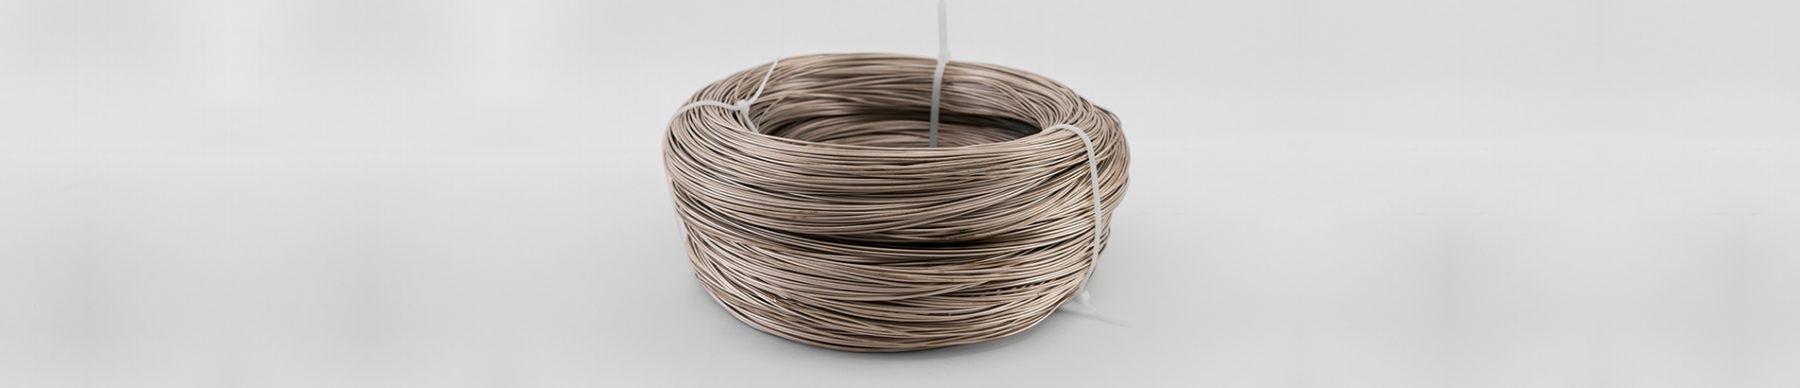 type k thermocouple wires